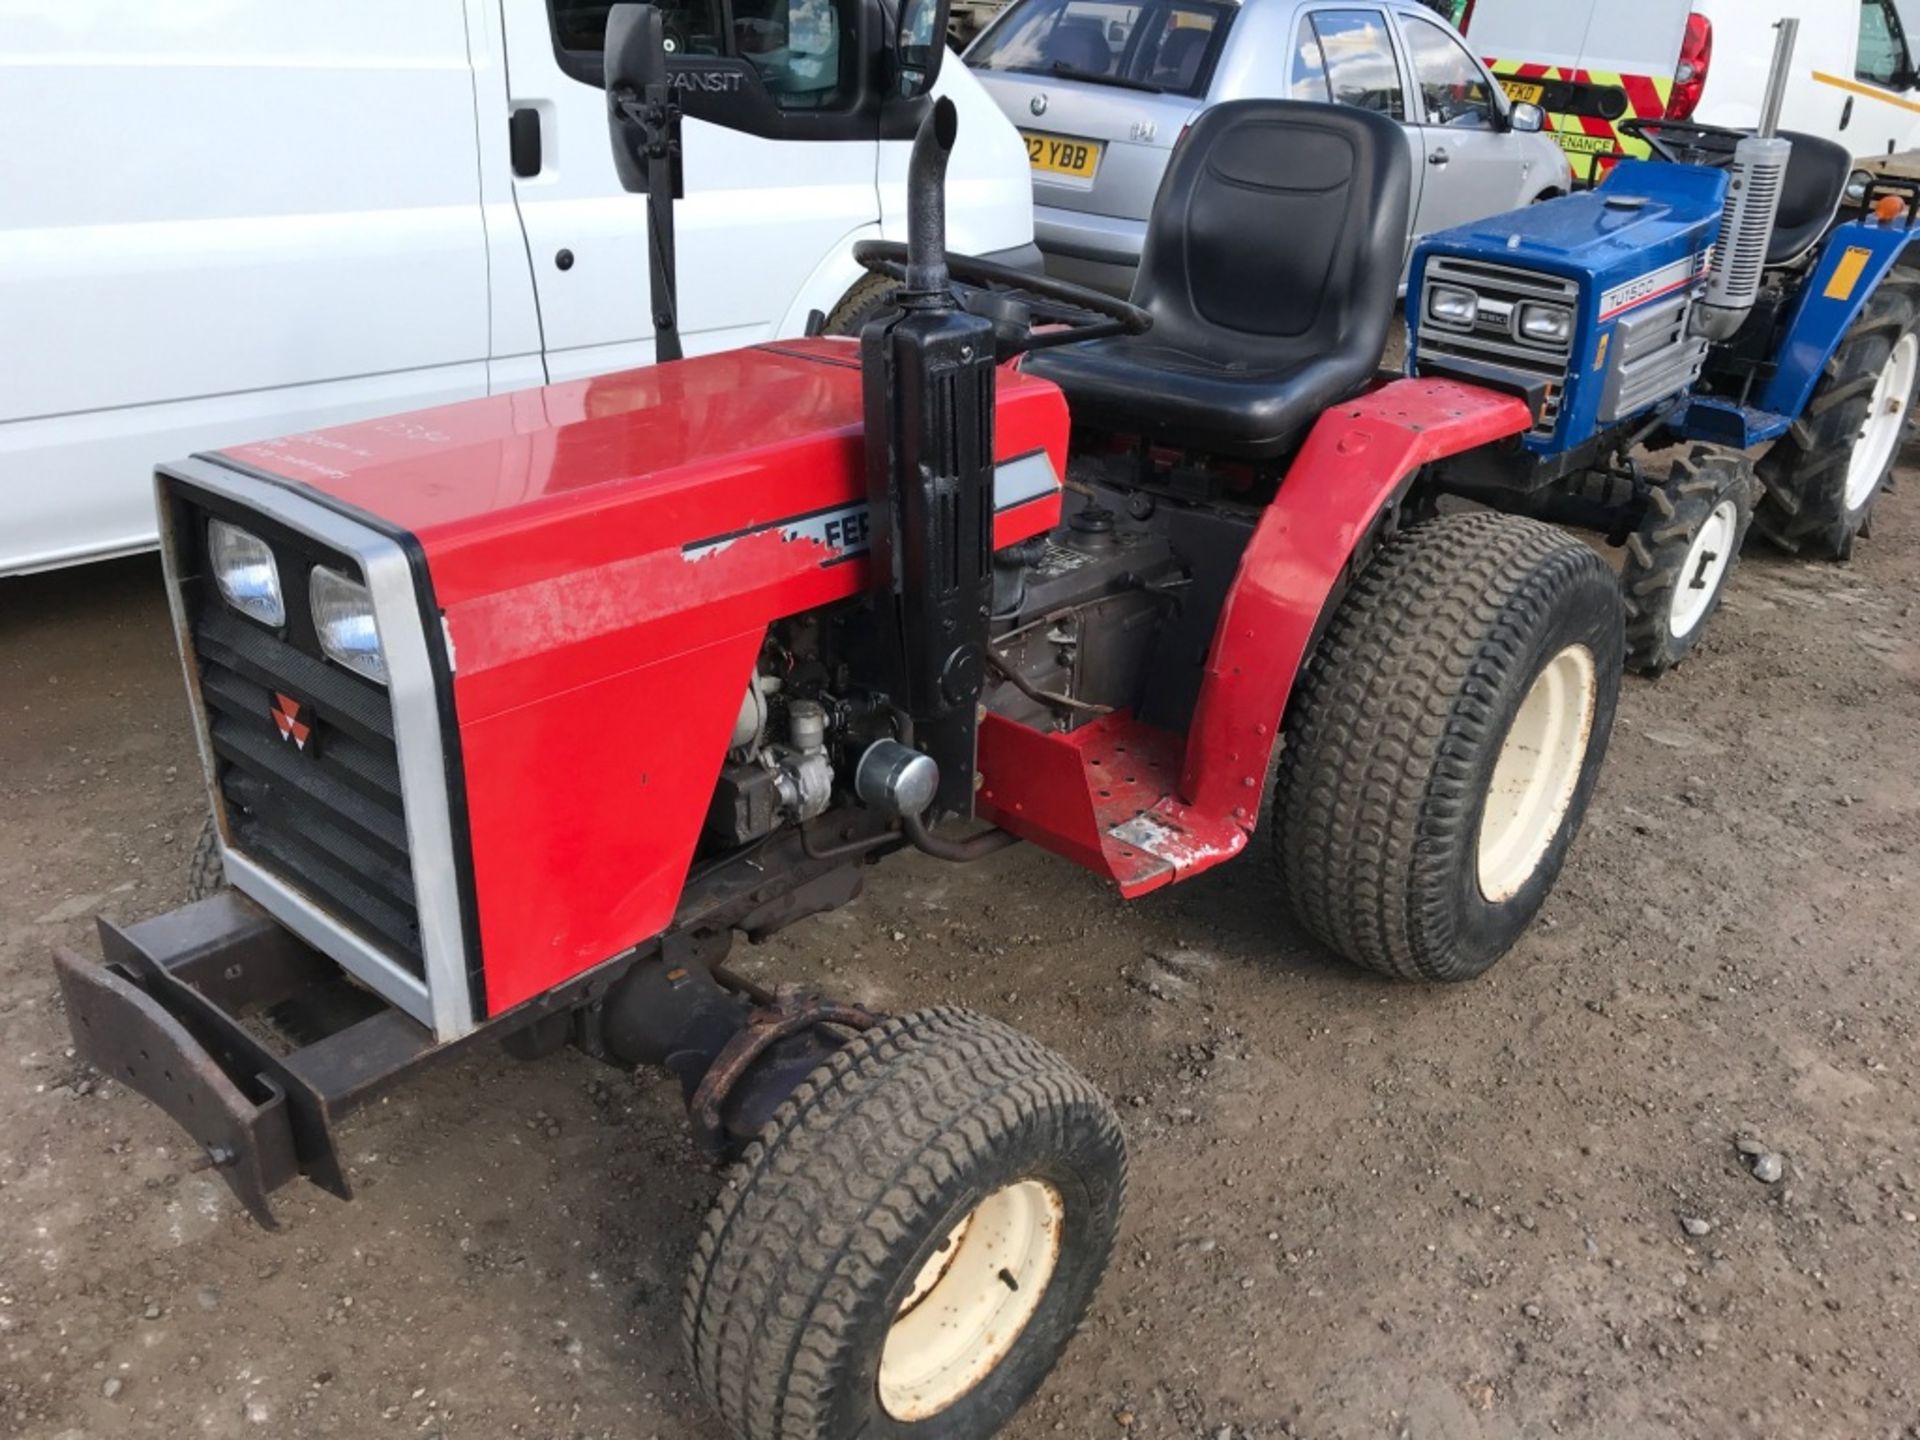 MASSEY FERGUSON 1010 4WD COMPACT TRACTOR WHEN TESTED WAS SEEN TO DRIVE, STEER AND BRAKE